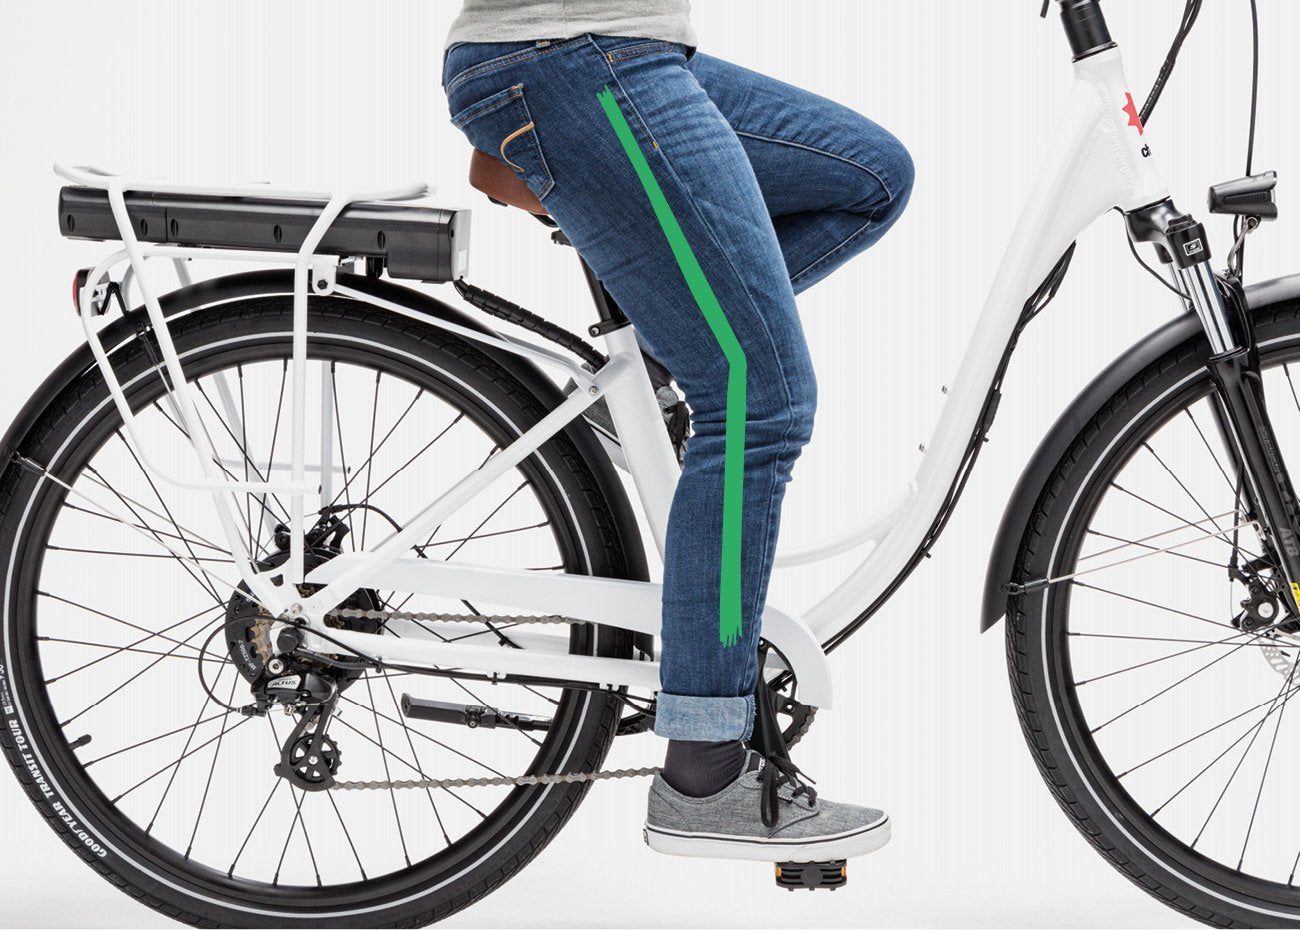 How to determine proper leg extension while riding your electric bike